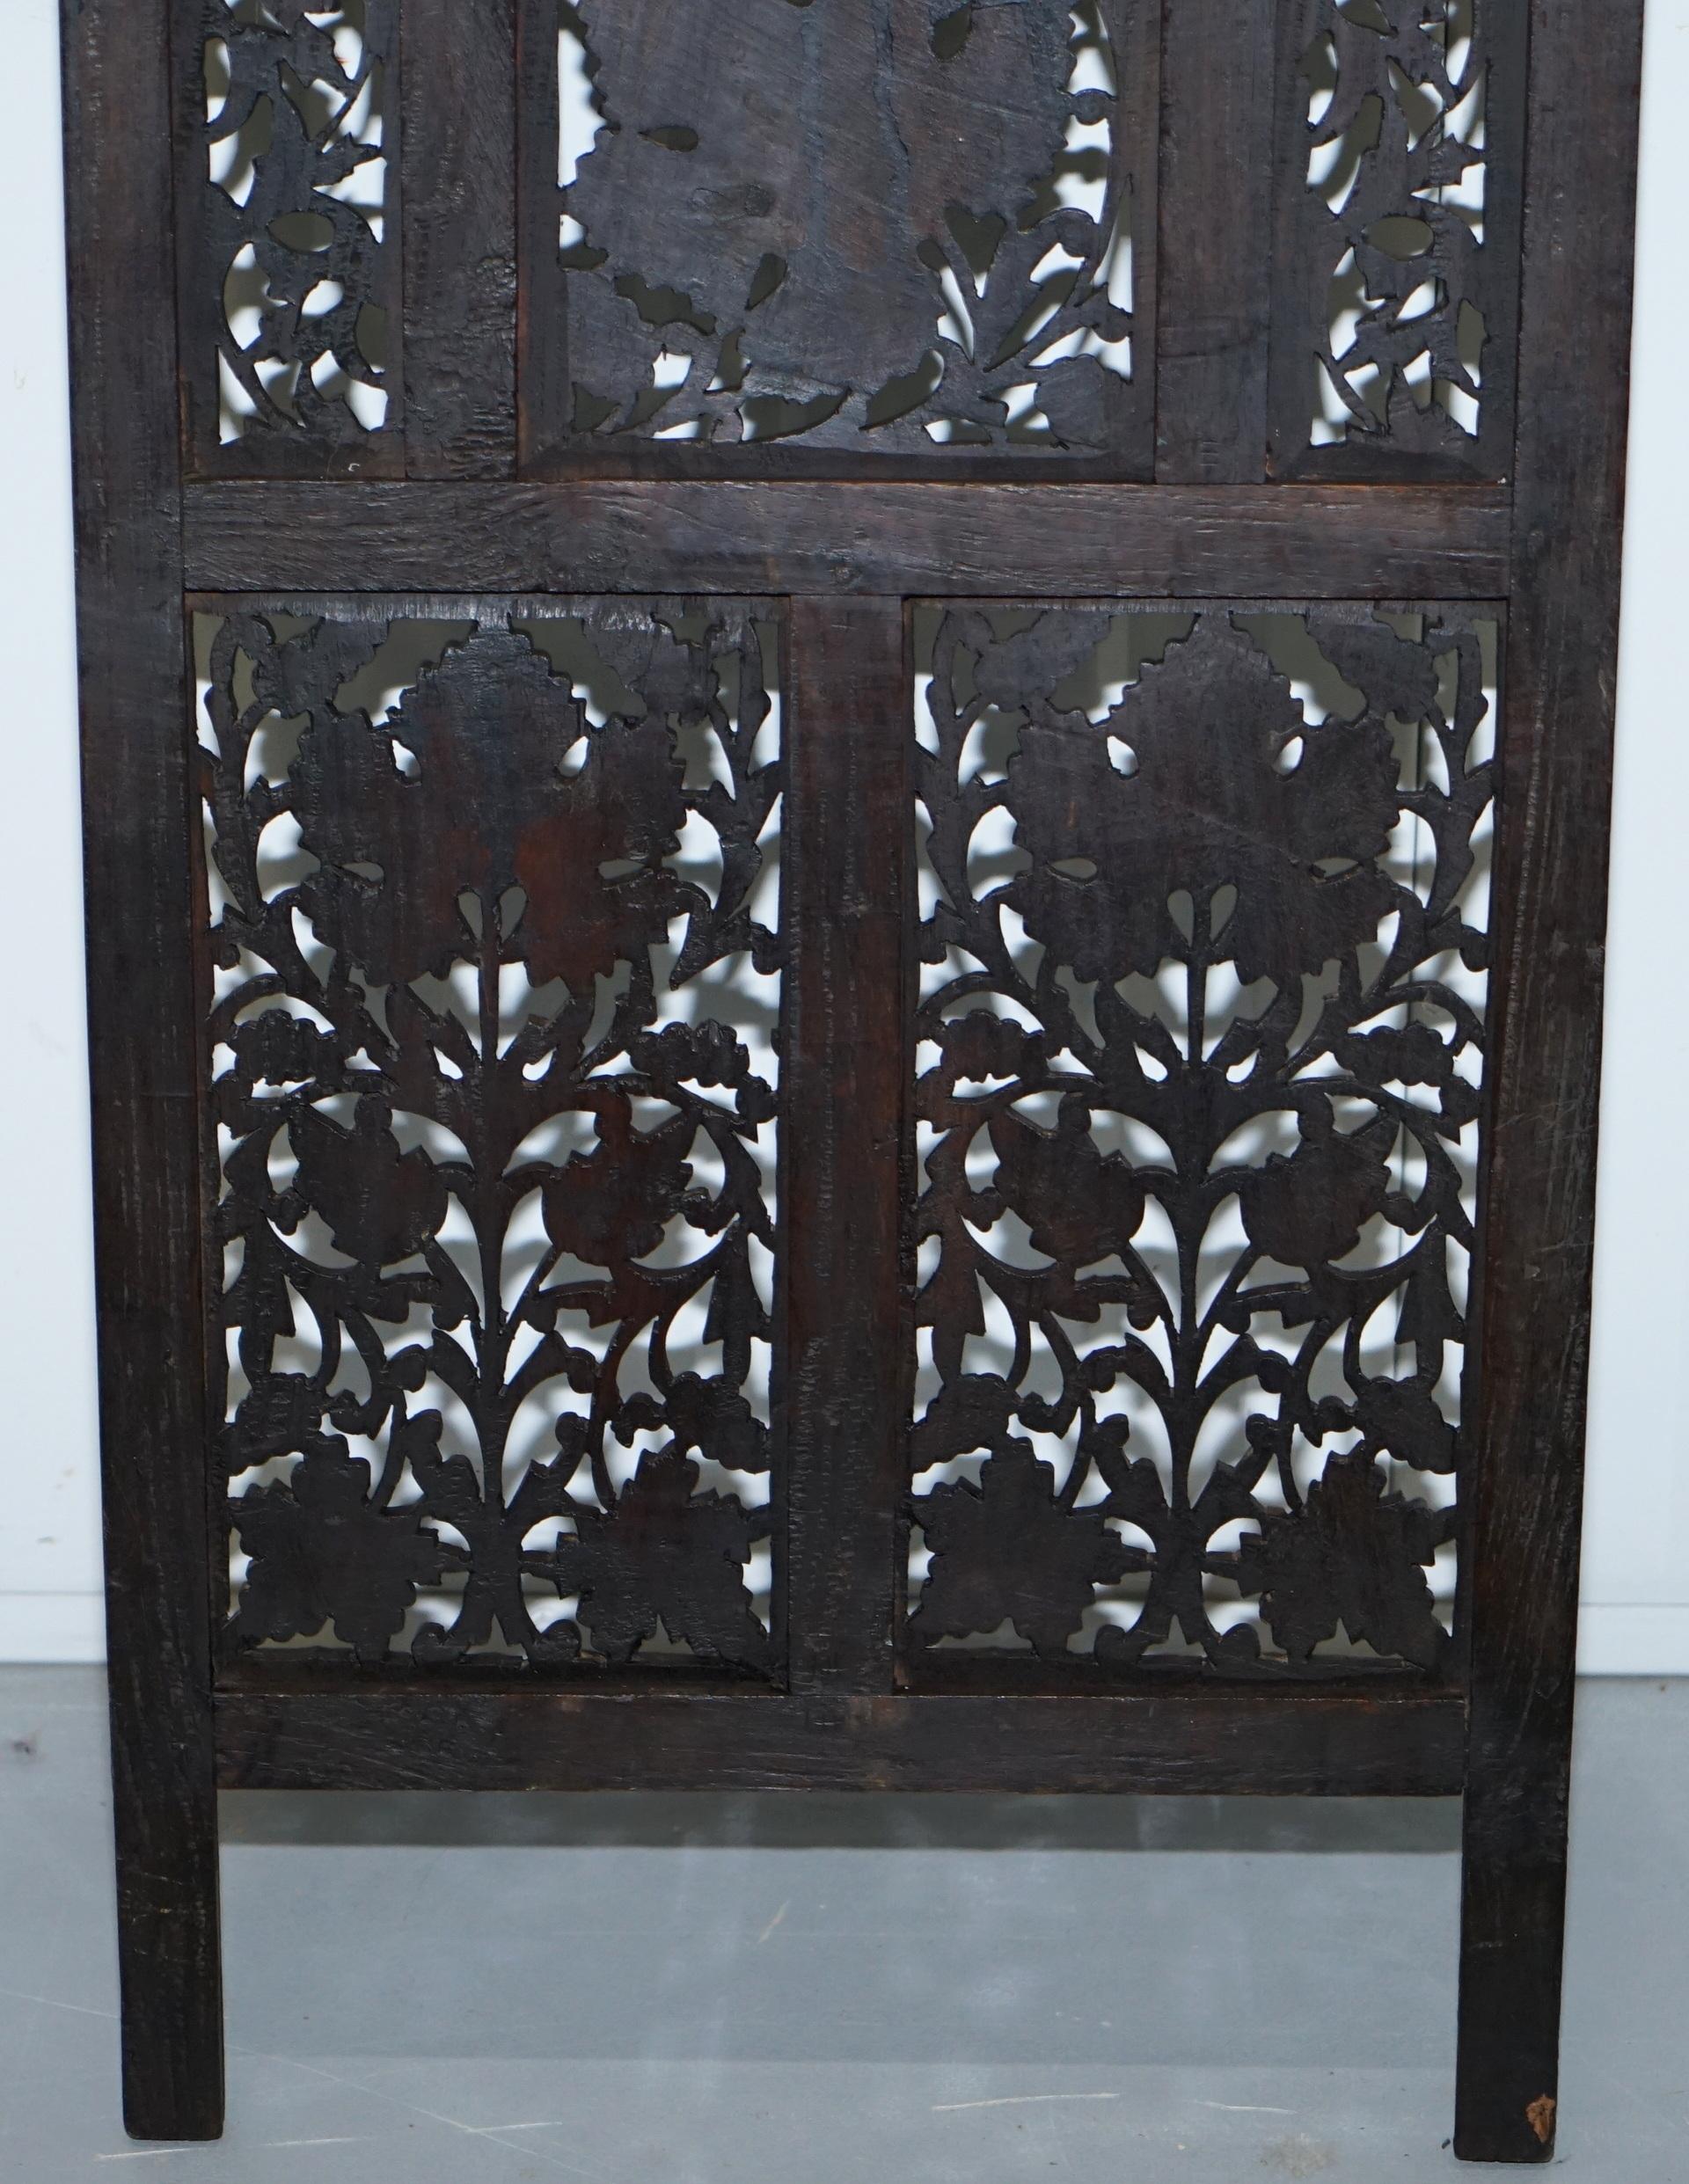 Rare Chinese Fretwork Carved Wall Panels Depicting Leaves Solid Teak Art Wood 1